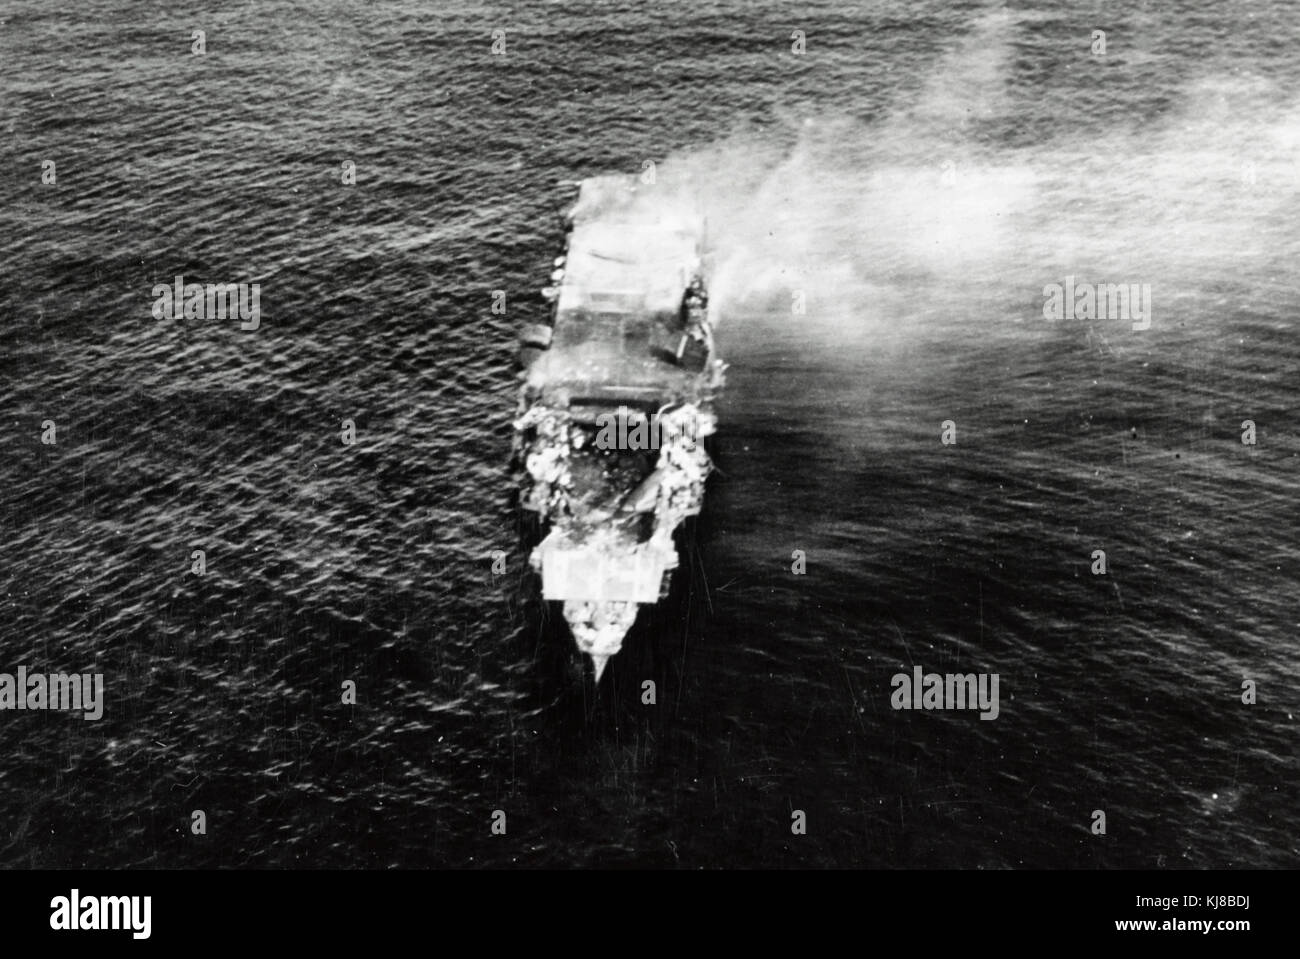 The burning Japanese aircraft carrier Hiryu, photographed by a Yokosuka B4Y aircraft from the carrier Hosho shortly after sunrise on 5 June 1942. Hiryu sank a few hours later. Note the collapsed flight deck over the forward hangar.  Battle of Midway Stock Photo